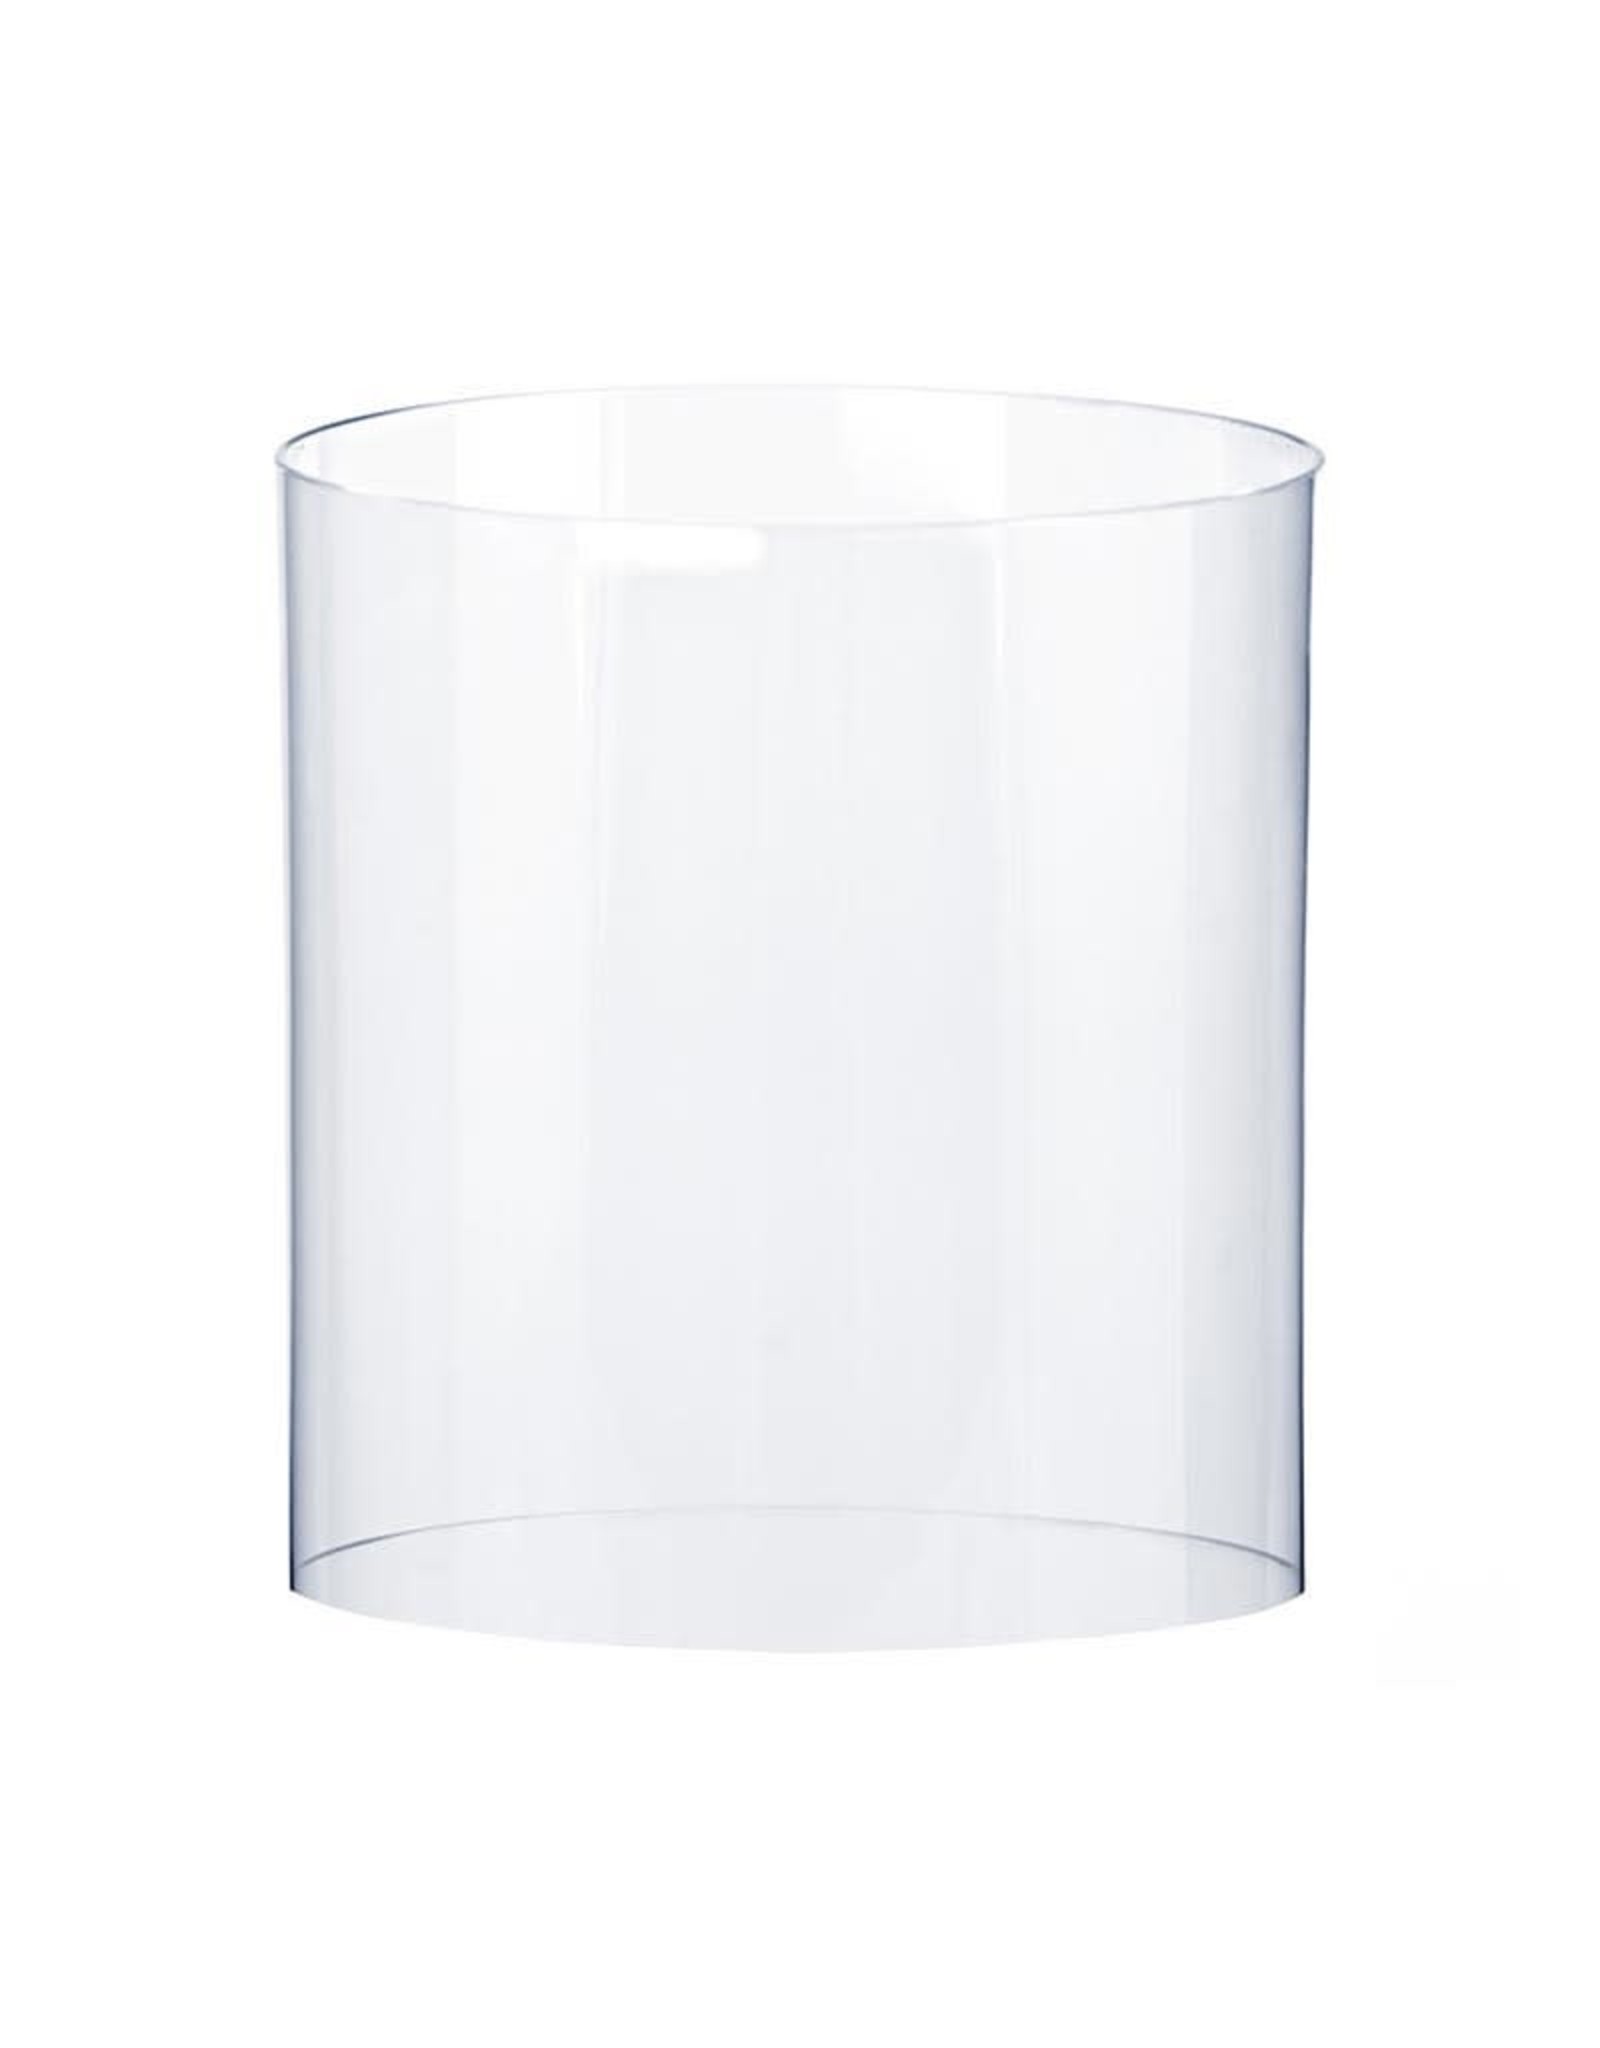 Christian Brands Deflector Glass for Candle Diameter: 1-1/2